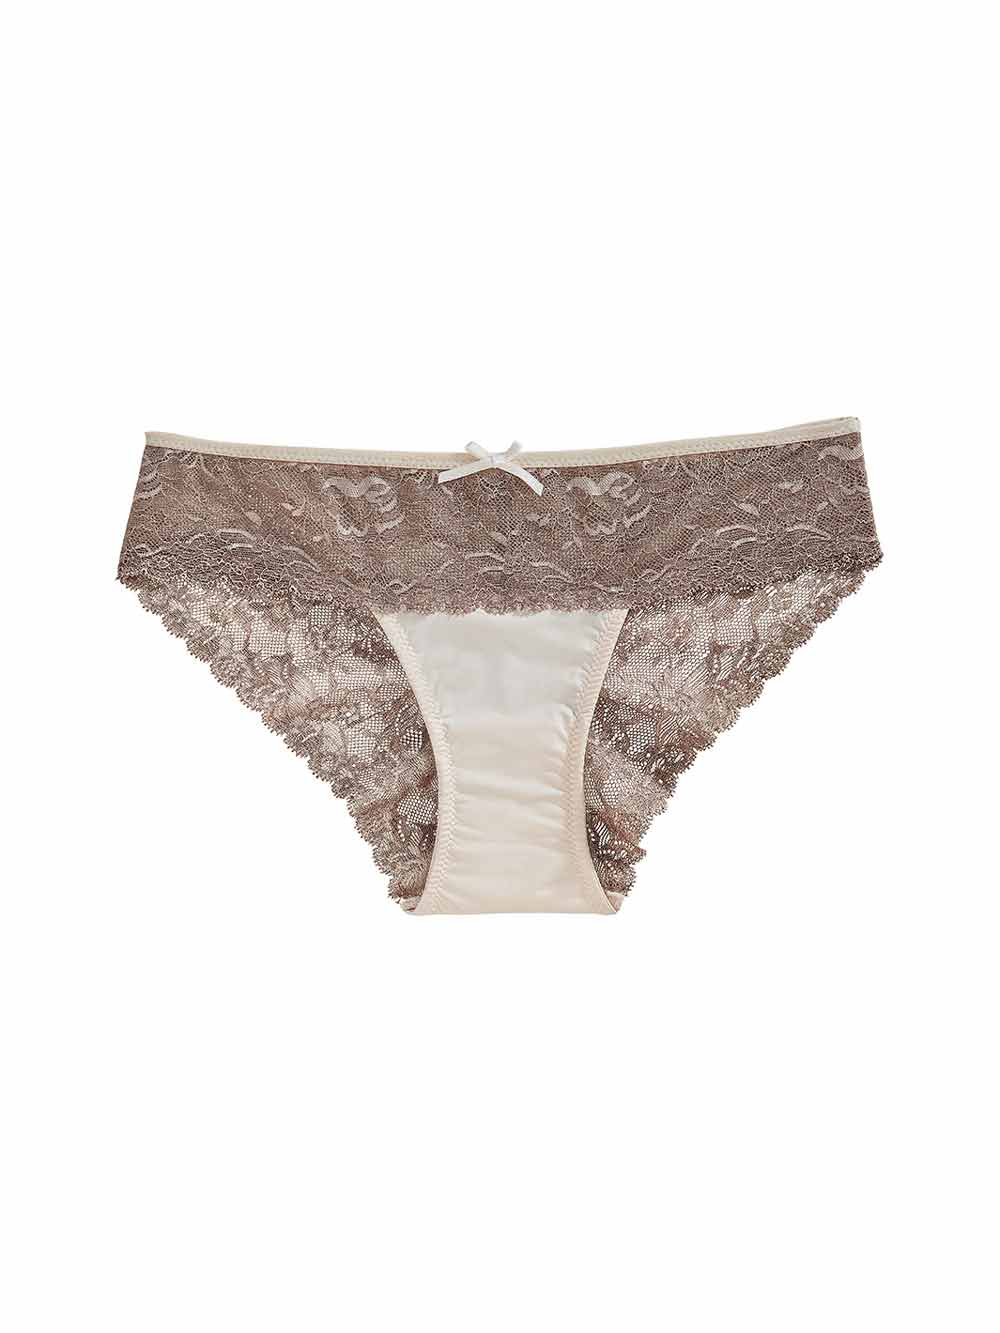 Kymber Cotton Front Lace Detailing Panty